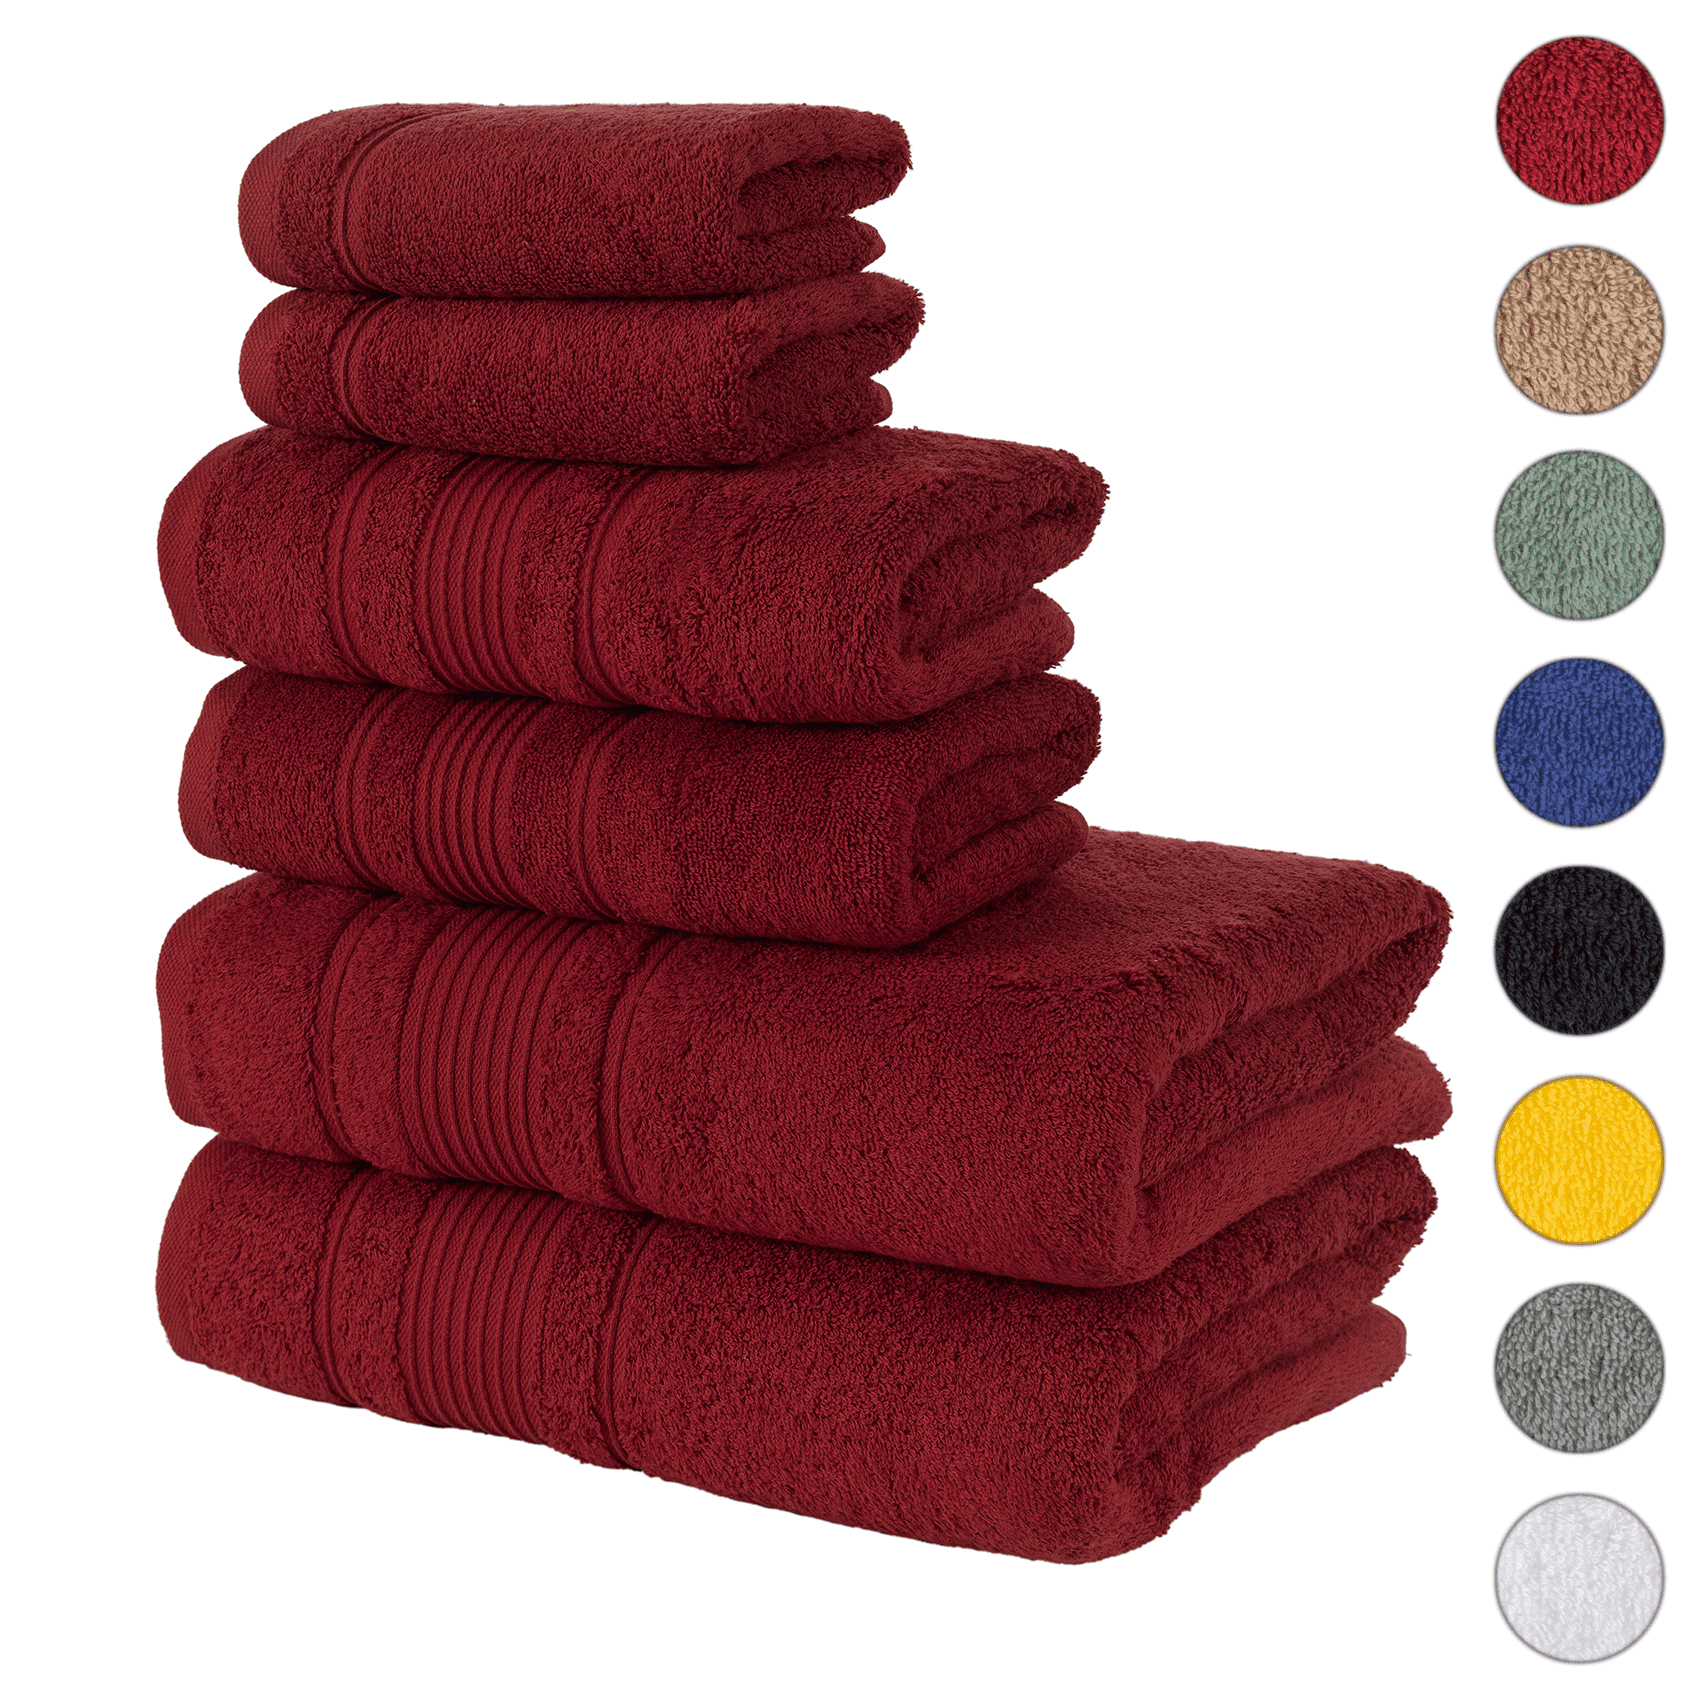 Details about   Towels Set for Bathroom Luxu Hotel & Spa Quality Highly Absorbent Super Soft 